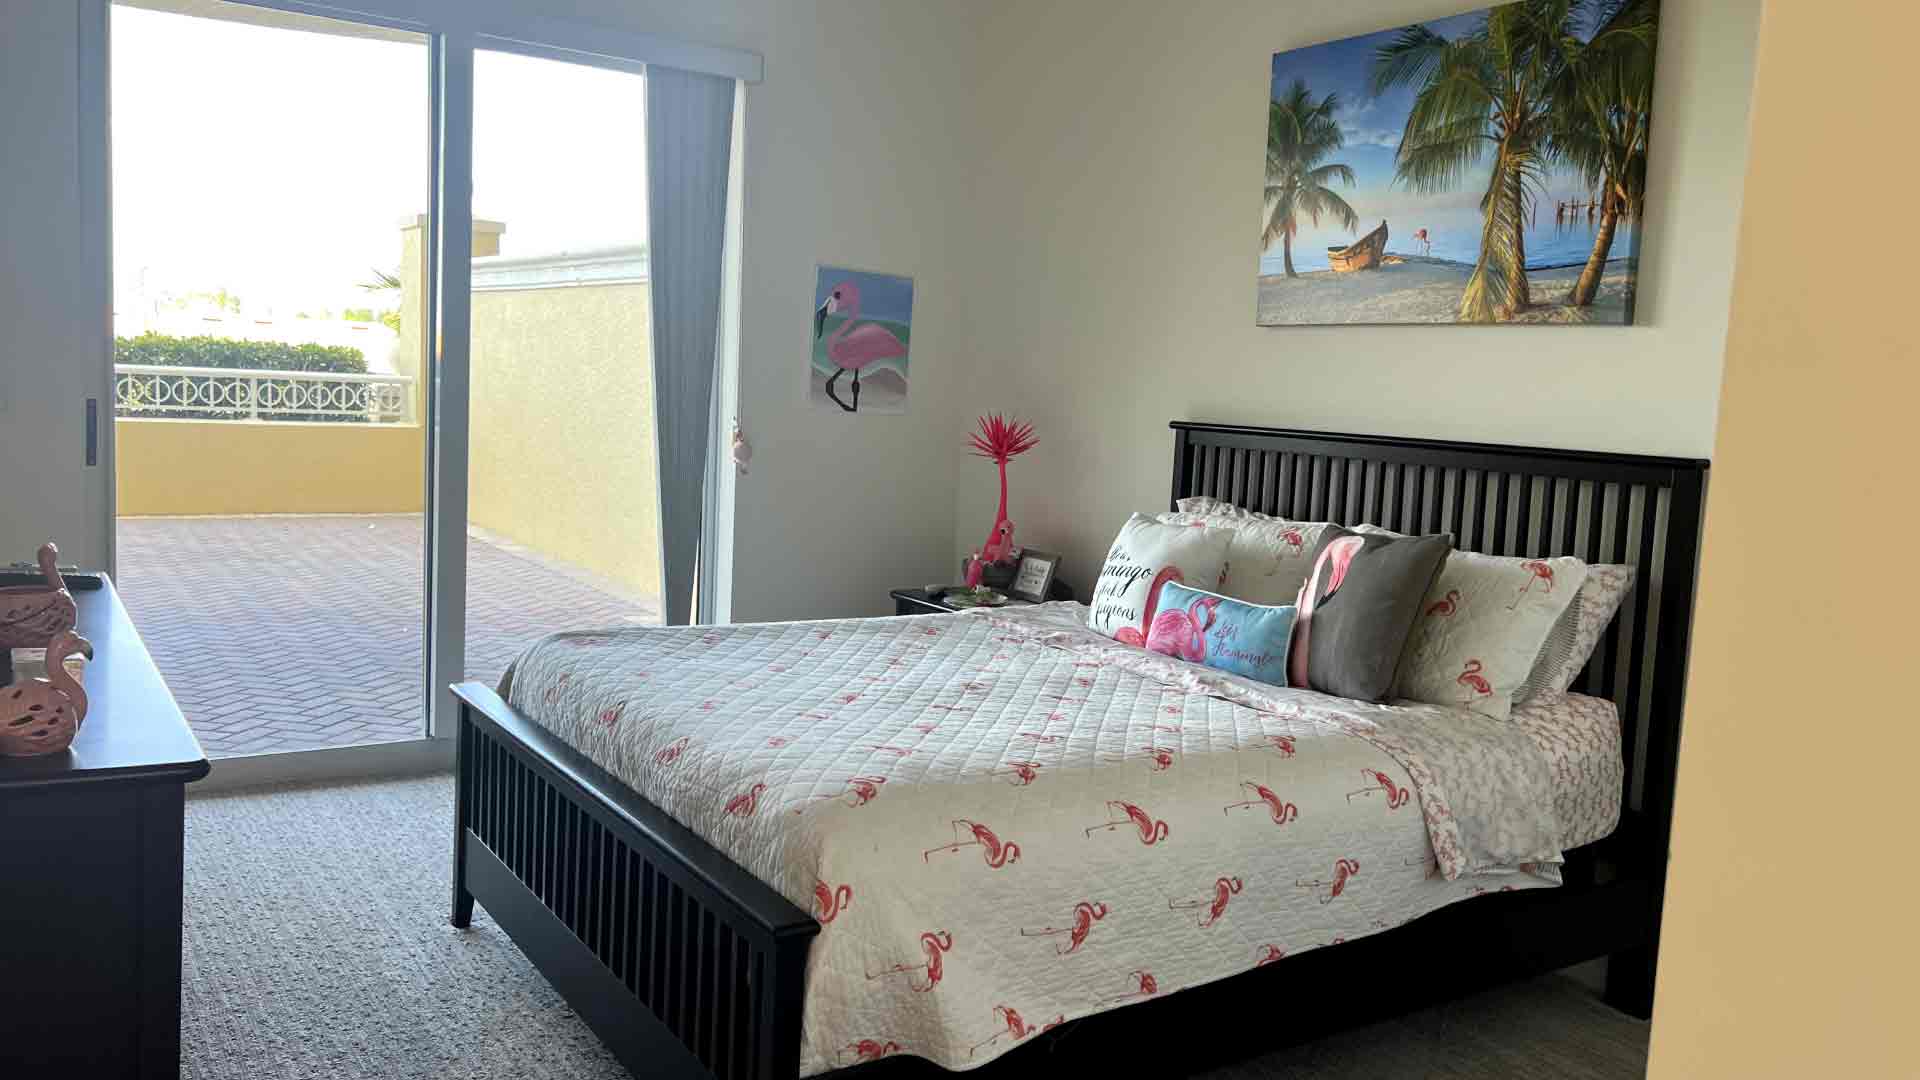 Bedroom - Deep condo cleaning in Cape Coral by Goldmillio - Apr 21 | https://www.google.com/maps/place/?cid=2863543821522134674